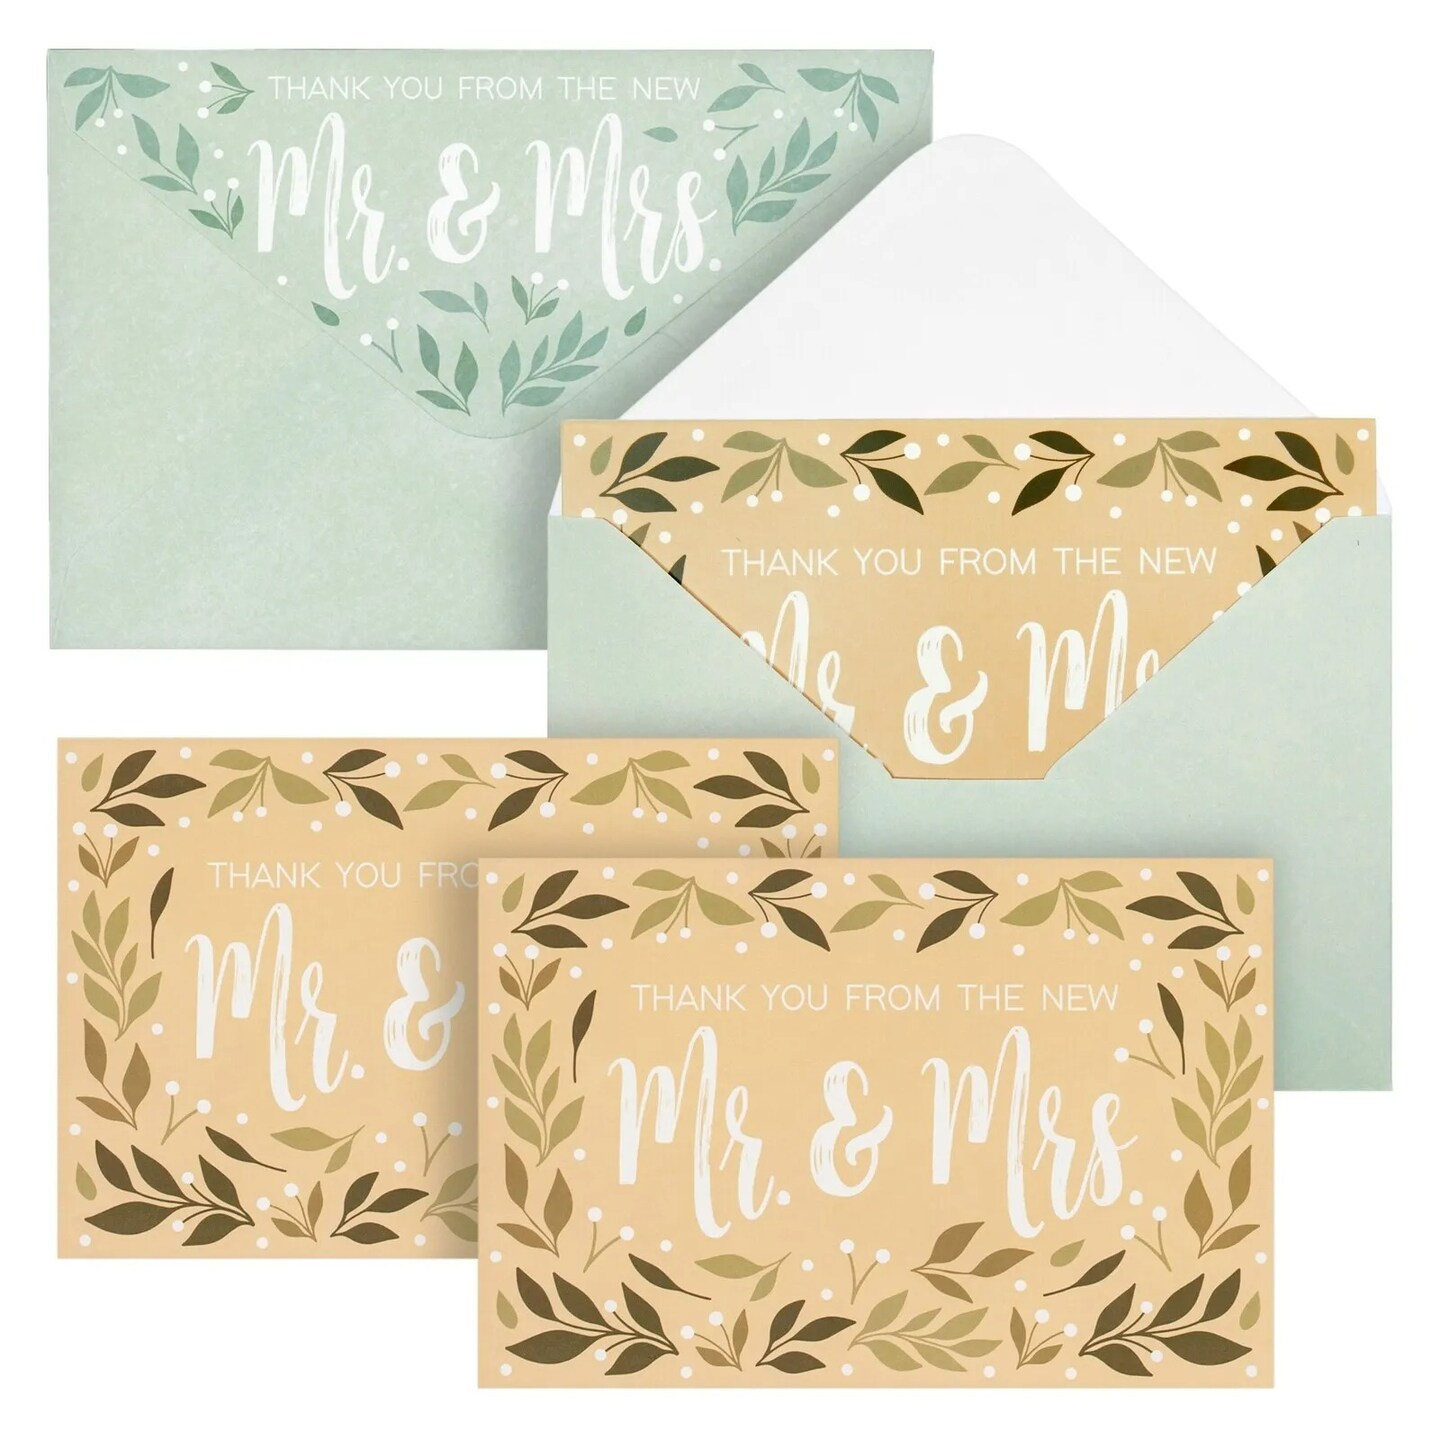 48 Pack New Mr and Mrs Wedding Thank You Cards with Decorative Envelopes, 4x6 In